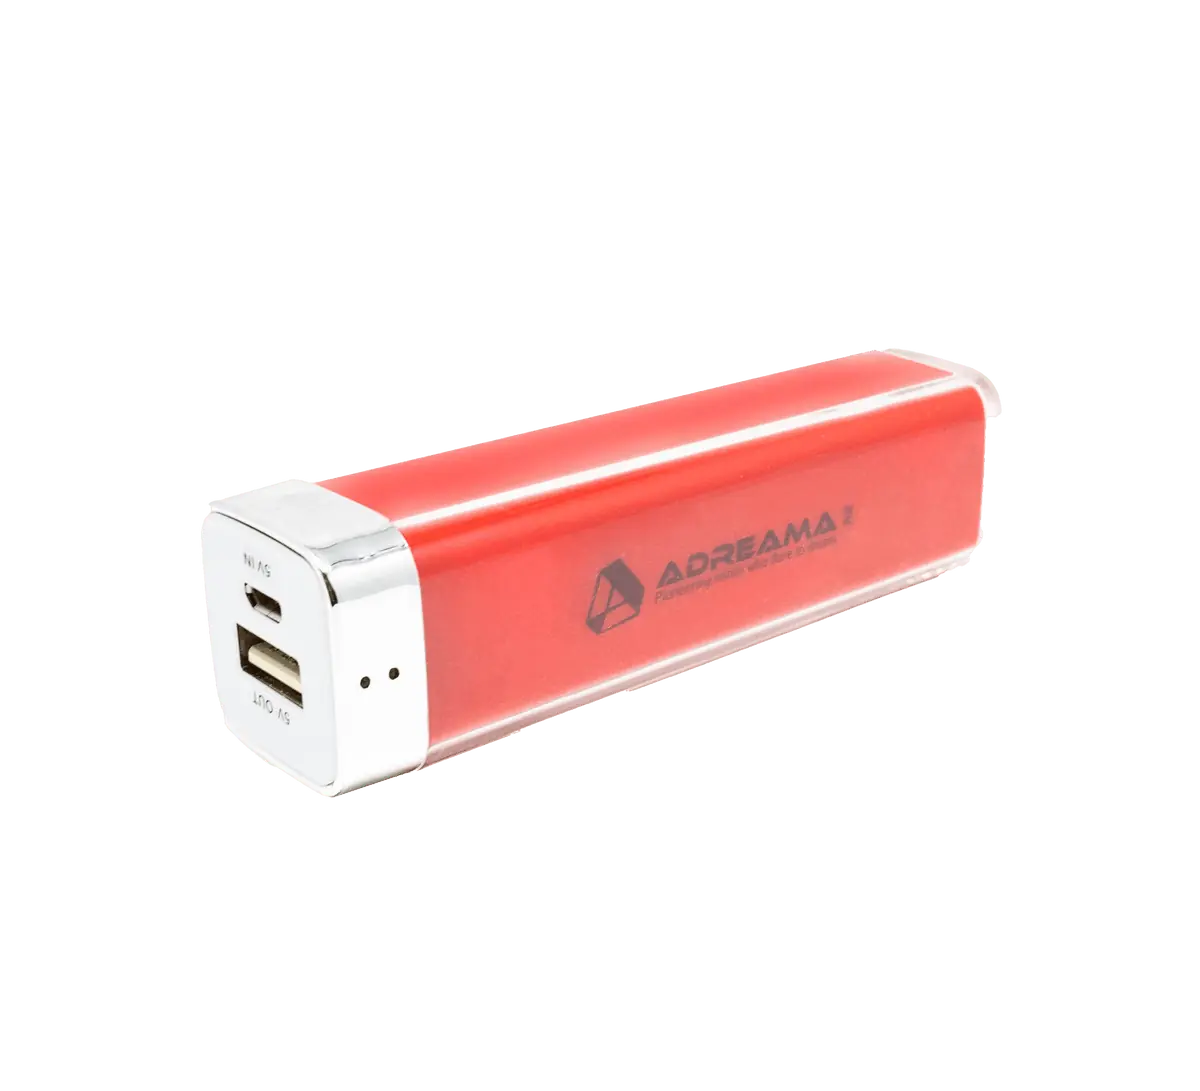 2800mAh Power Bank, Portable Charger with micro-USB and USB-A Ports, Red, Three-quarter Angle View.